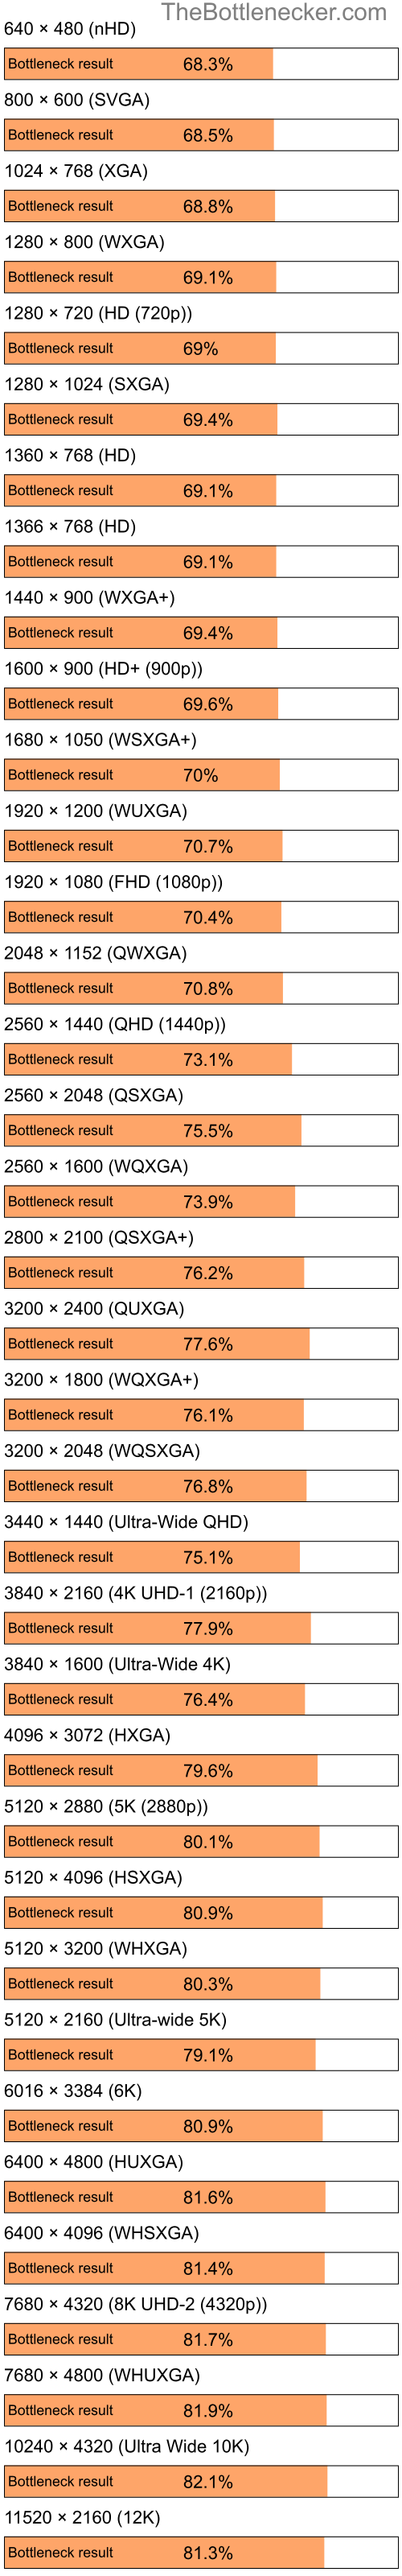 Bottleneck results by resolution for Intel Atom N270 and AMD Radeon HD 2350 in7 Days to Die